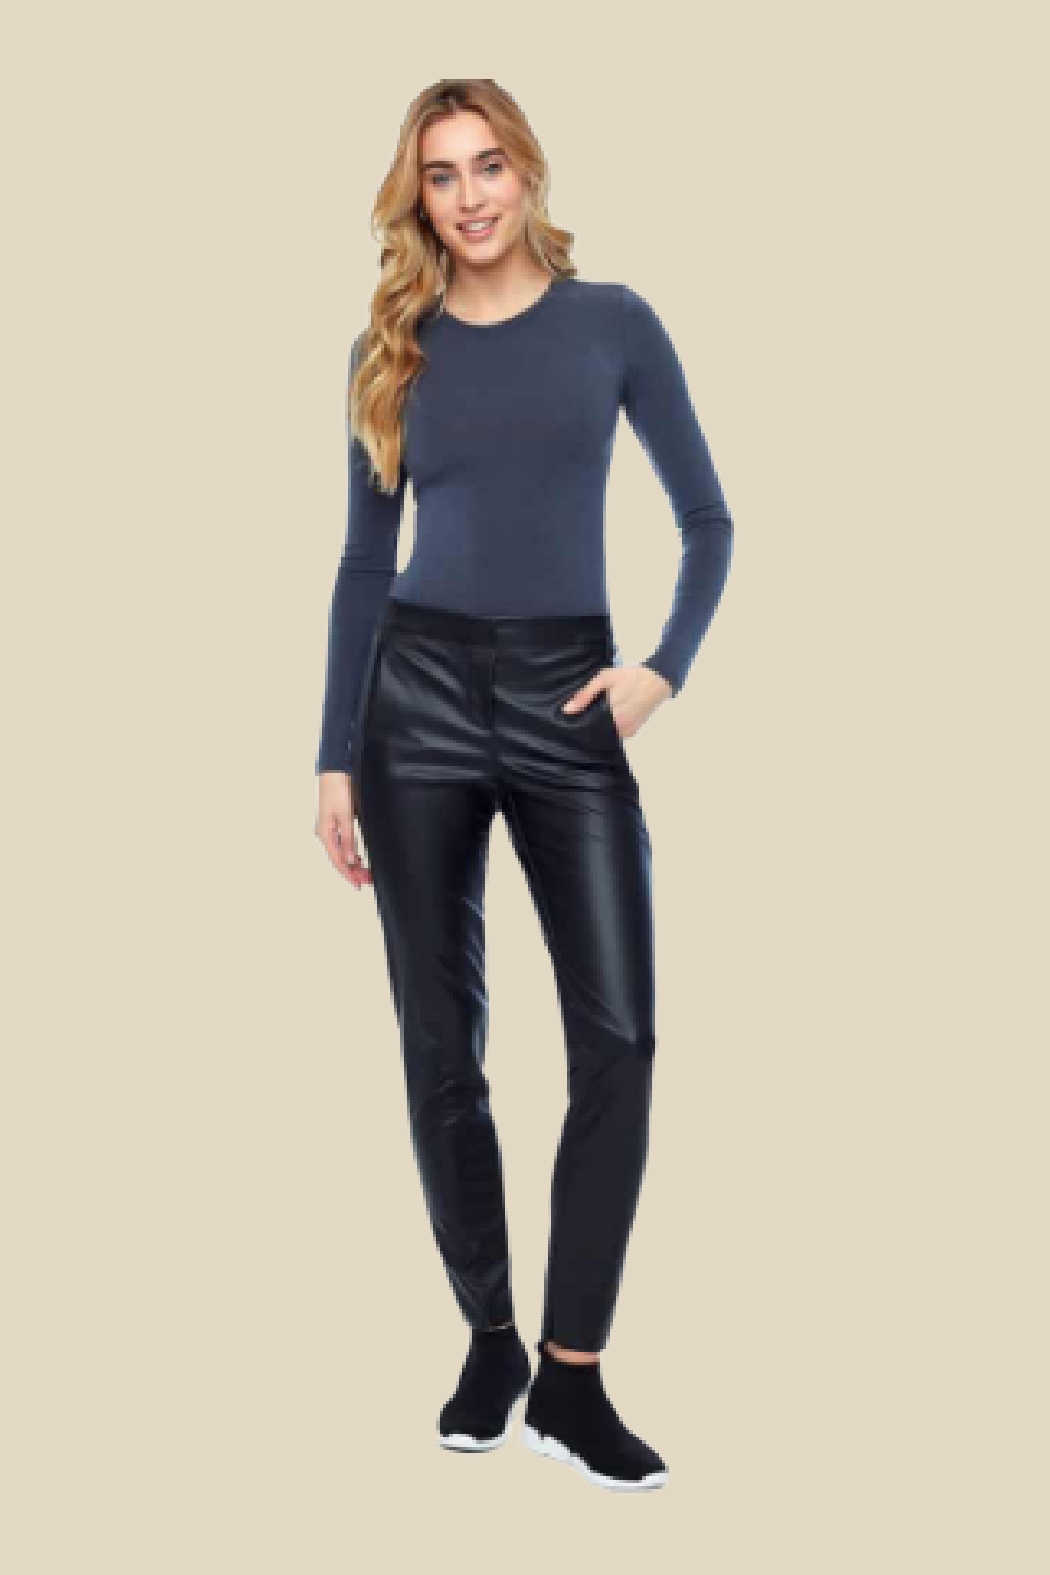 Pleather Pant – The Old Mill